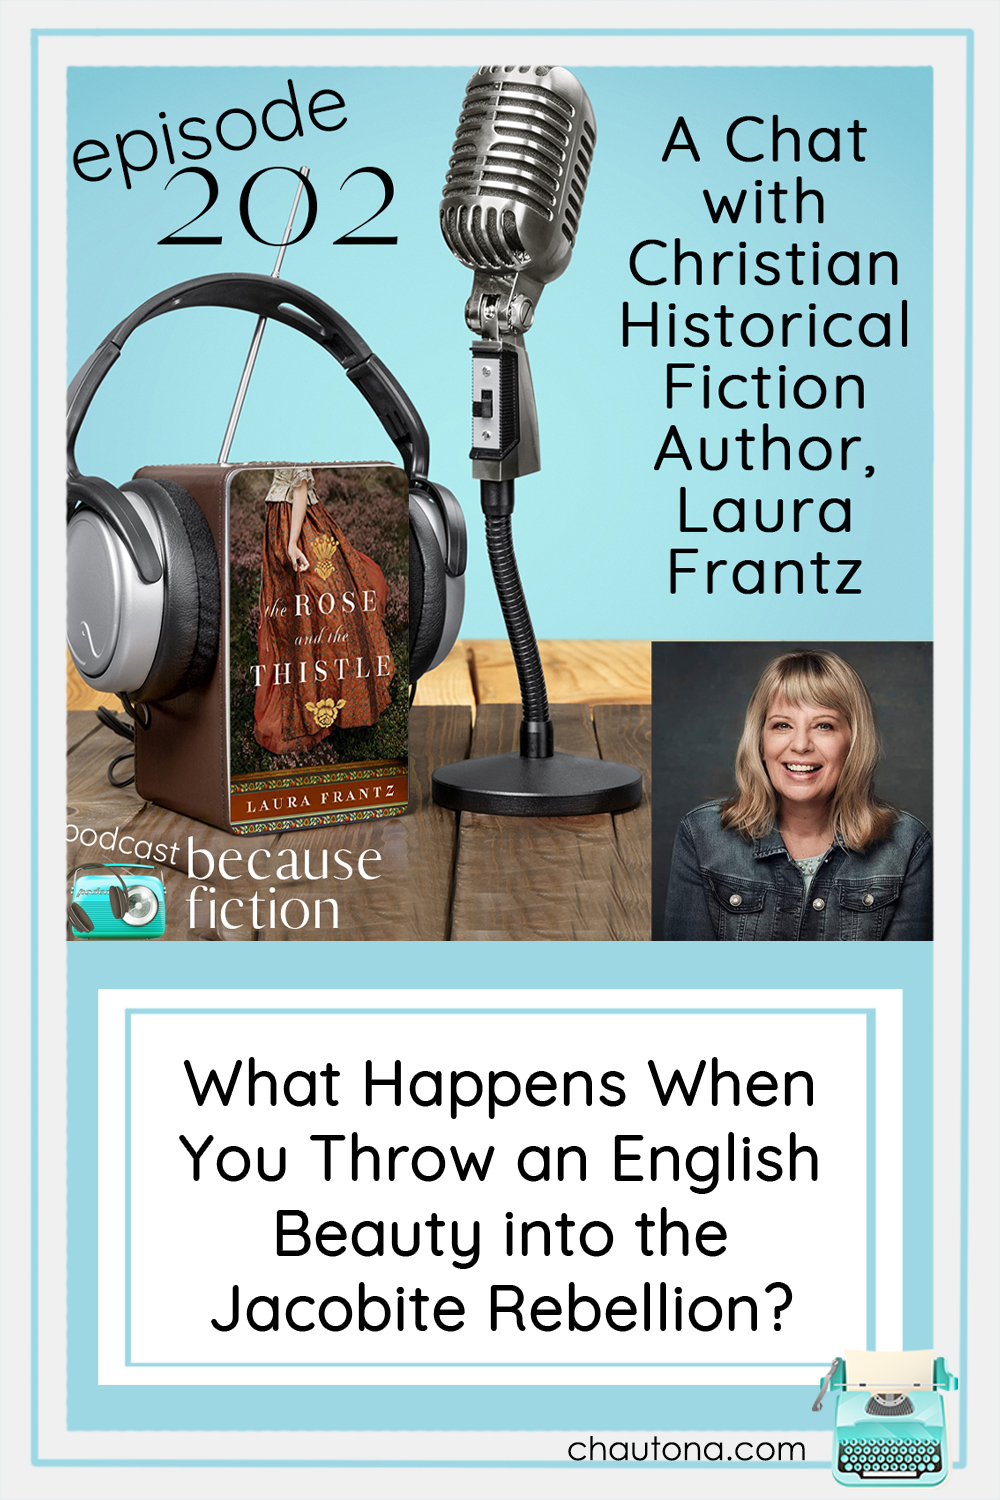 Author of popular colonial Christian historical fiction, Laura Frantz just released a new book that you've got to hear about. via @chautonahavig